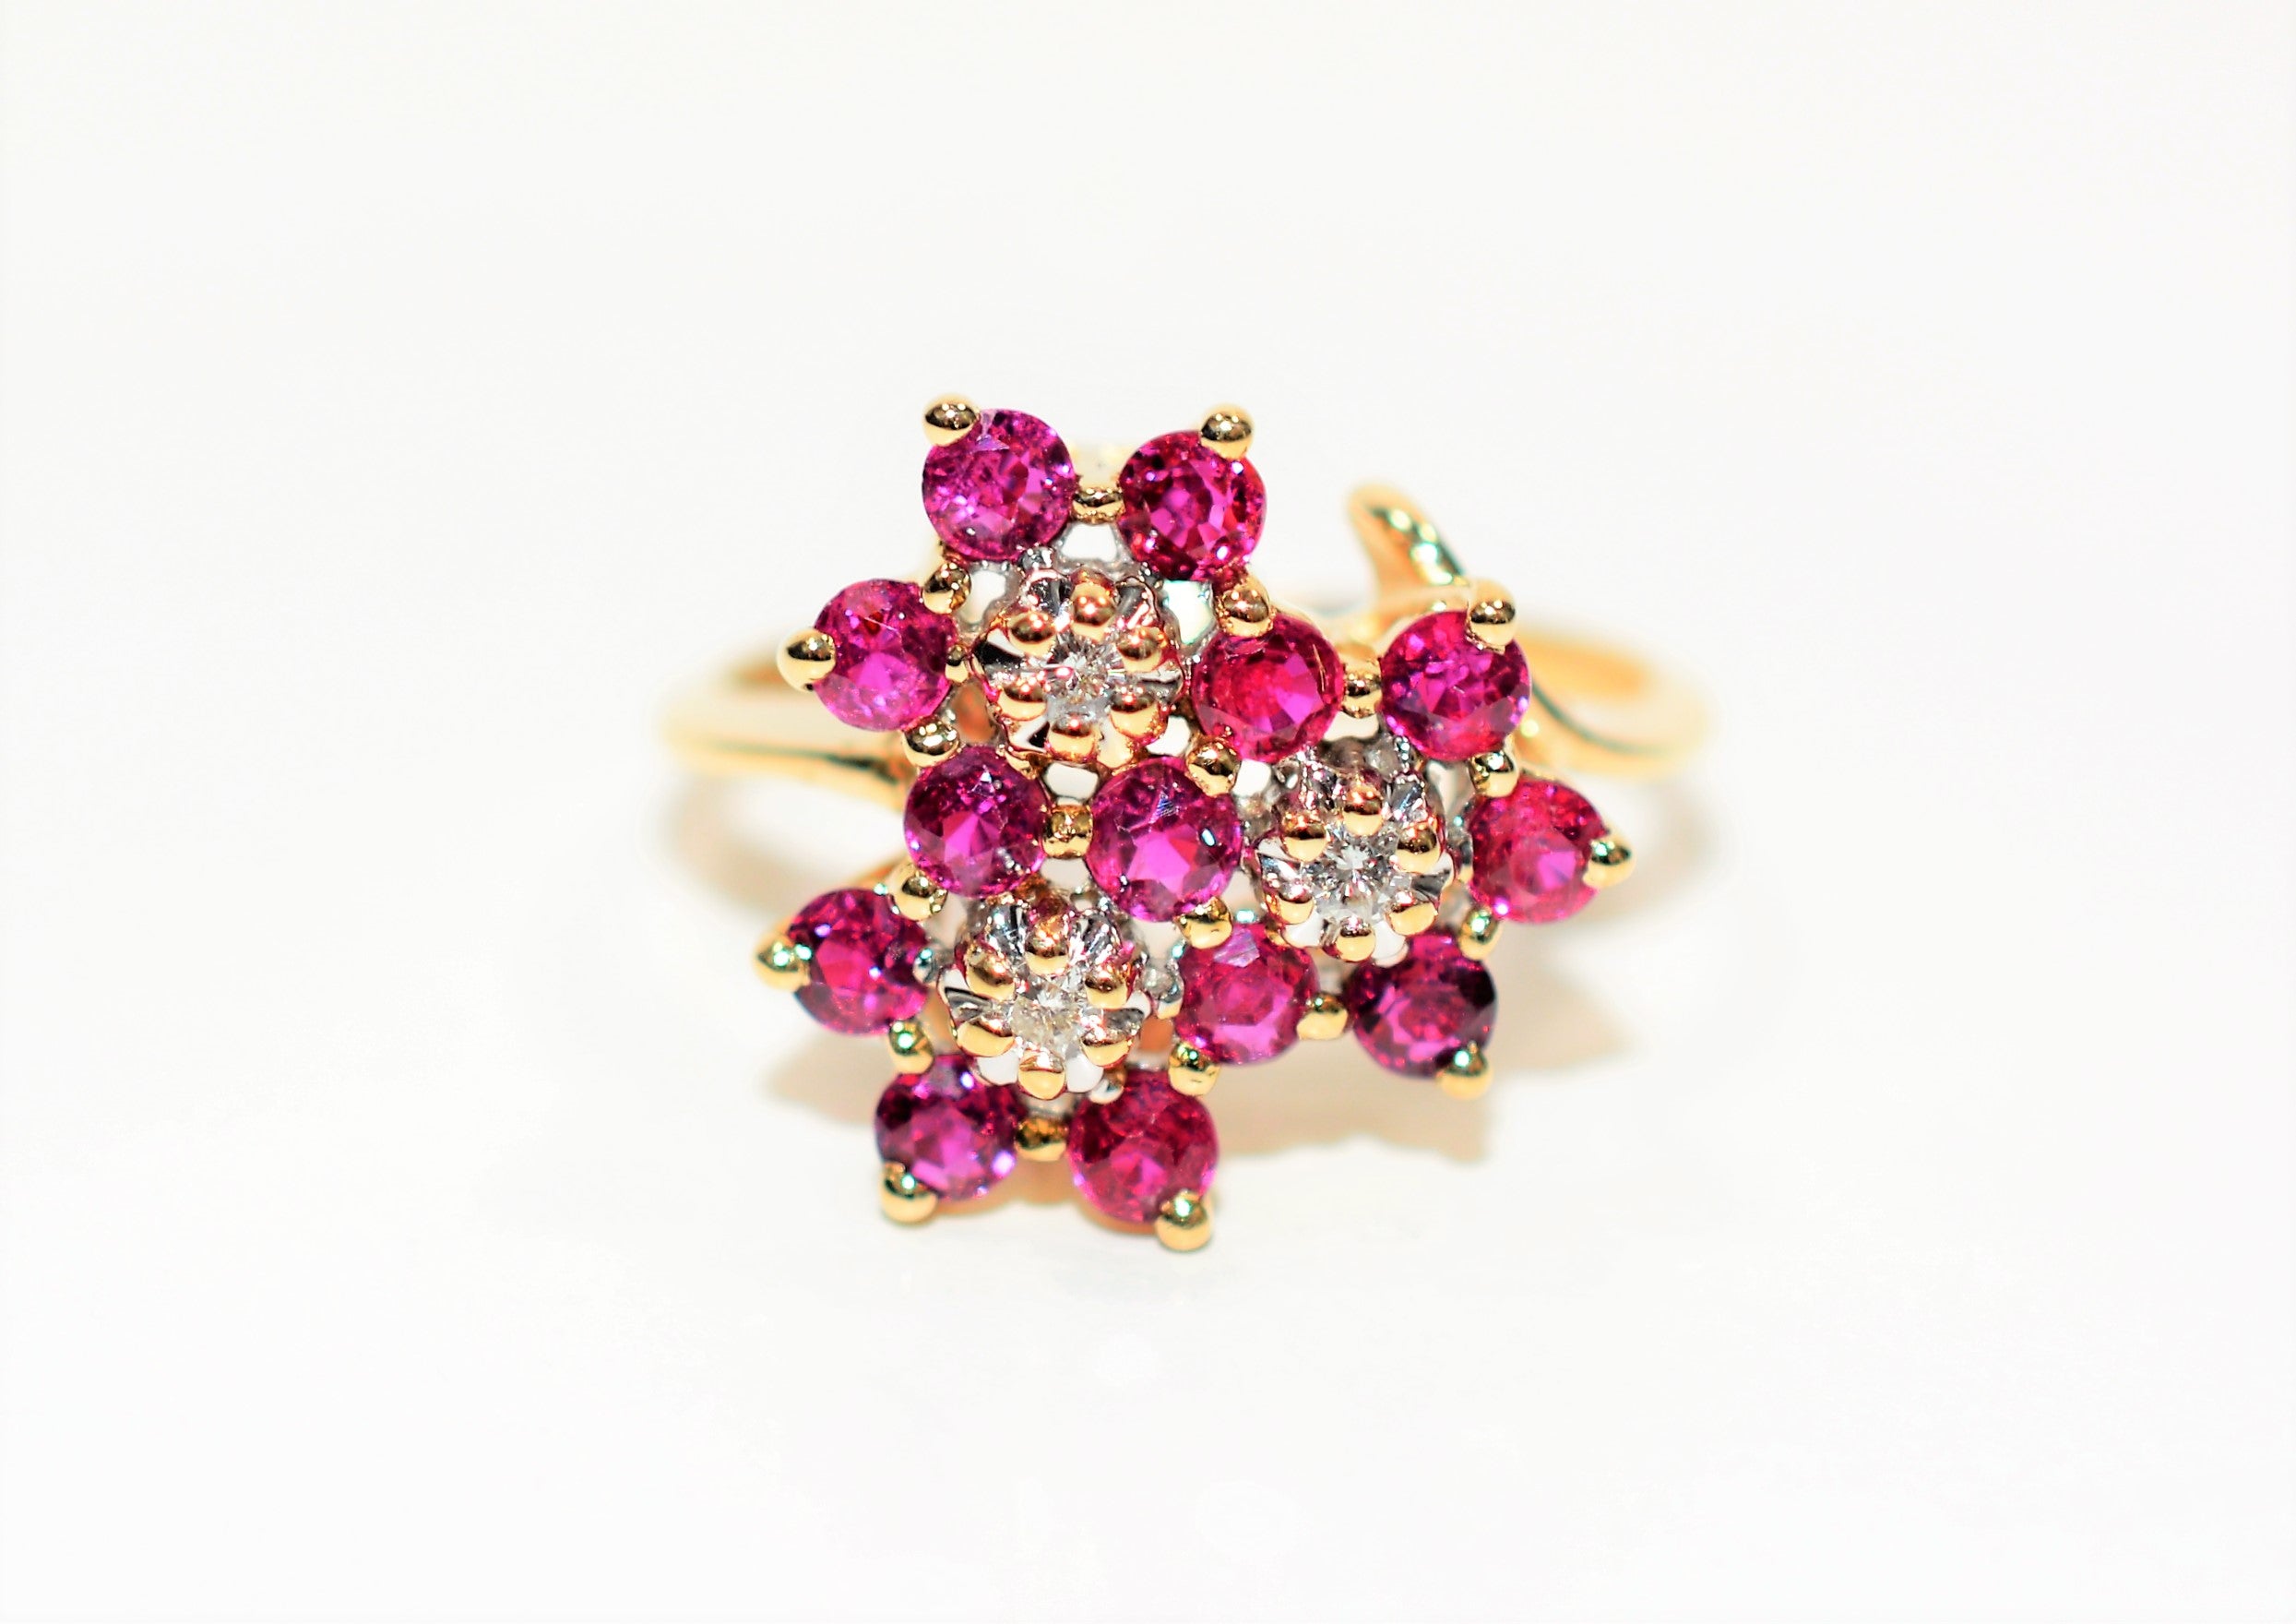 Natural Ruby & Diamond Ring 14K Solid Gold .87tcw Ruby Ring Flower Ring Ladies Ring Gemstone Ring Cluster Ring  Womens Ring Red Ring Jewelry